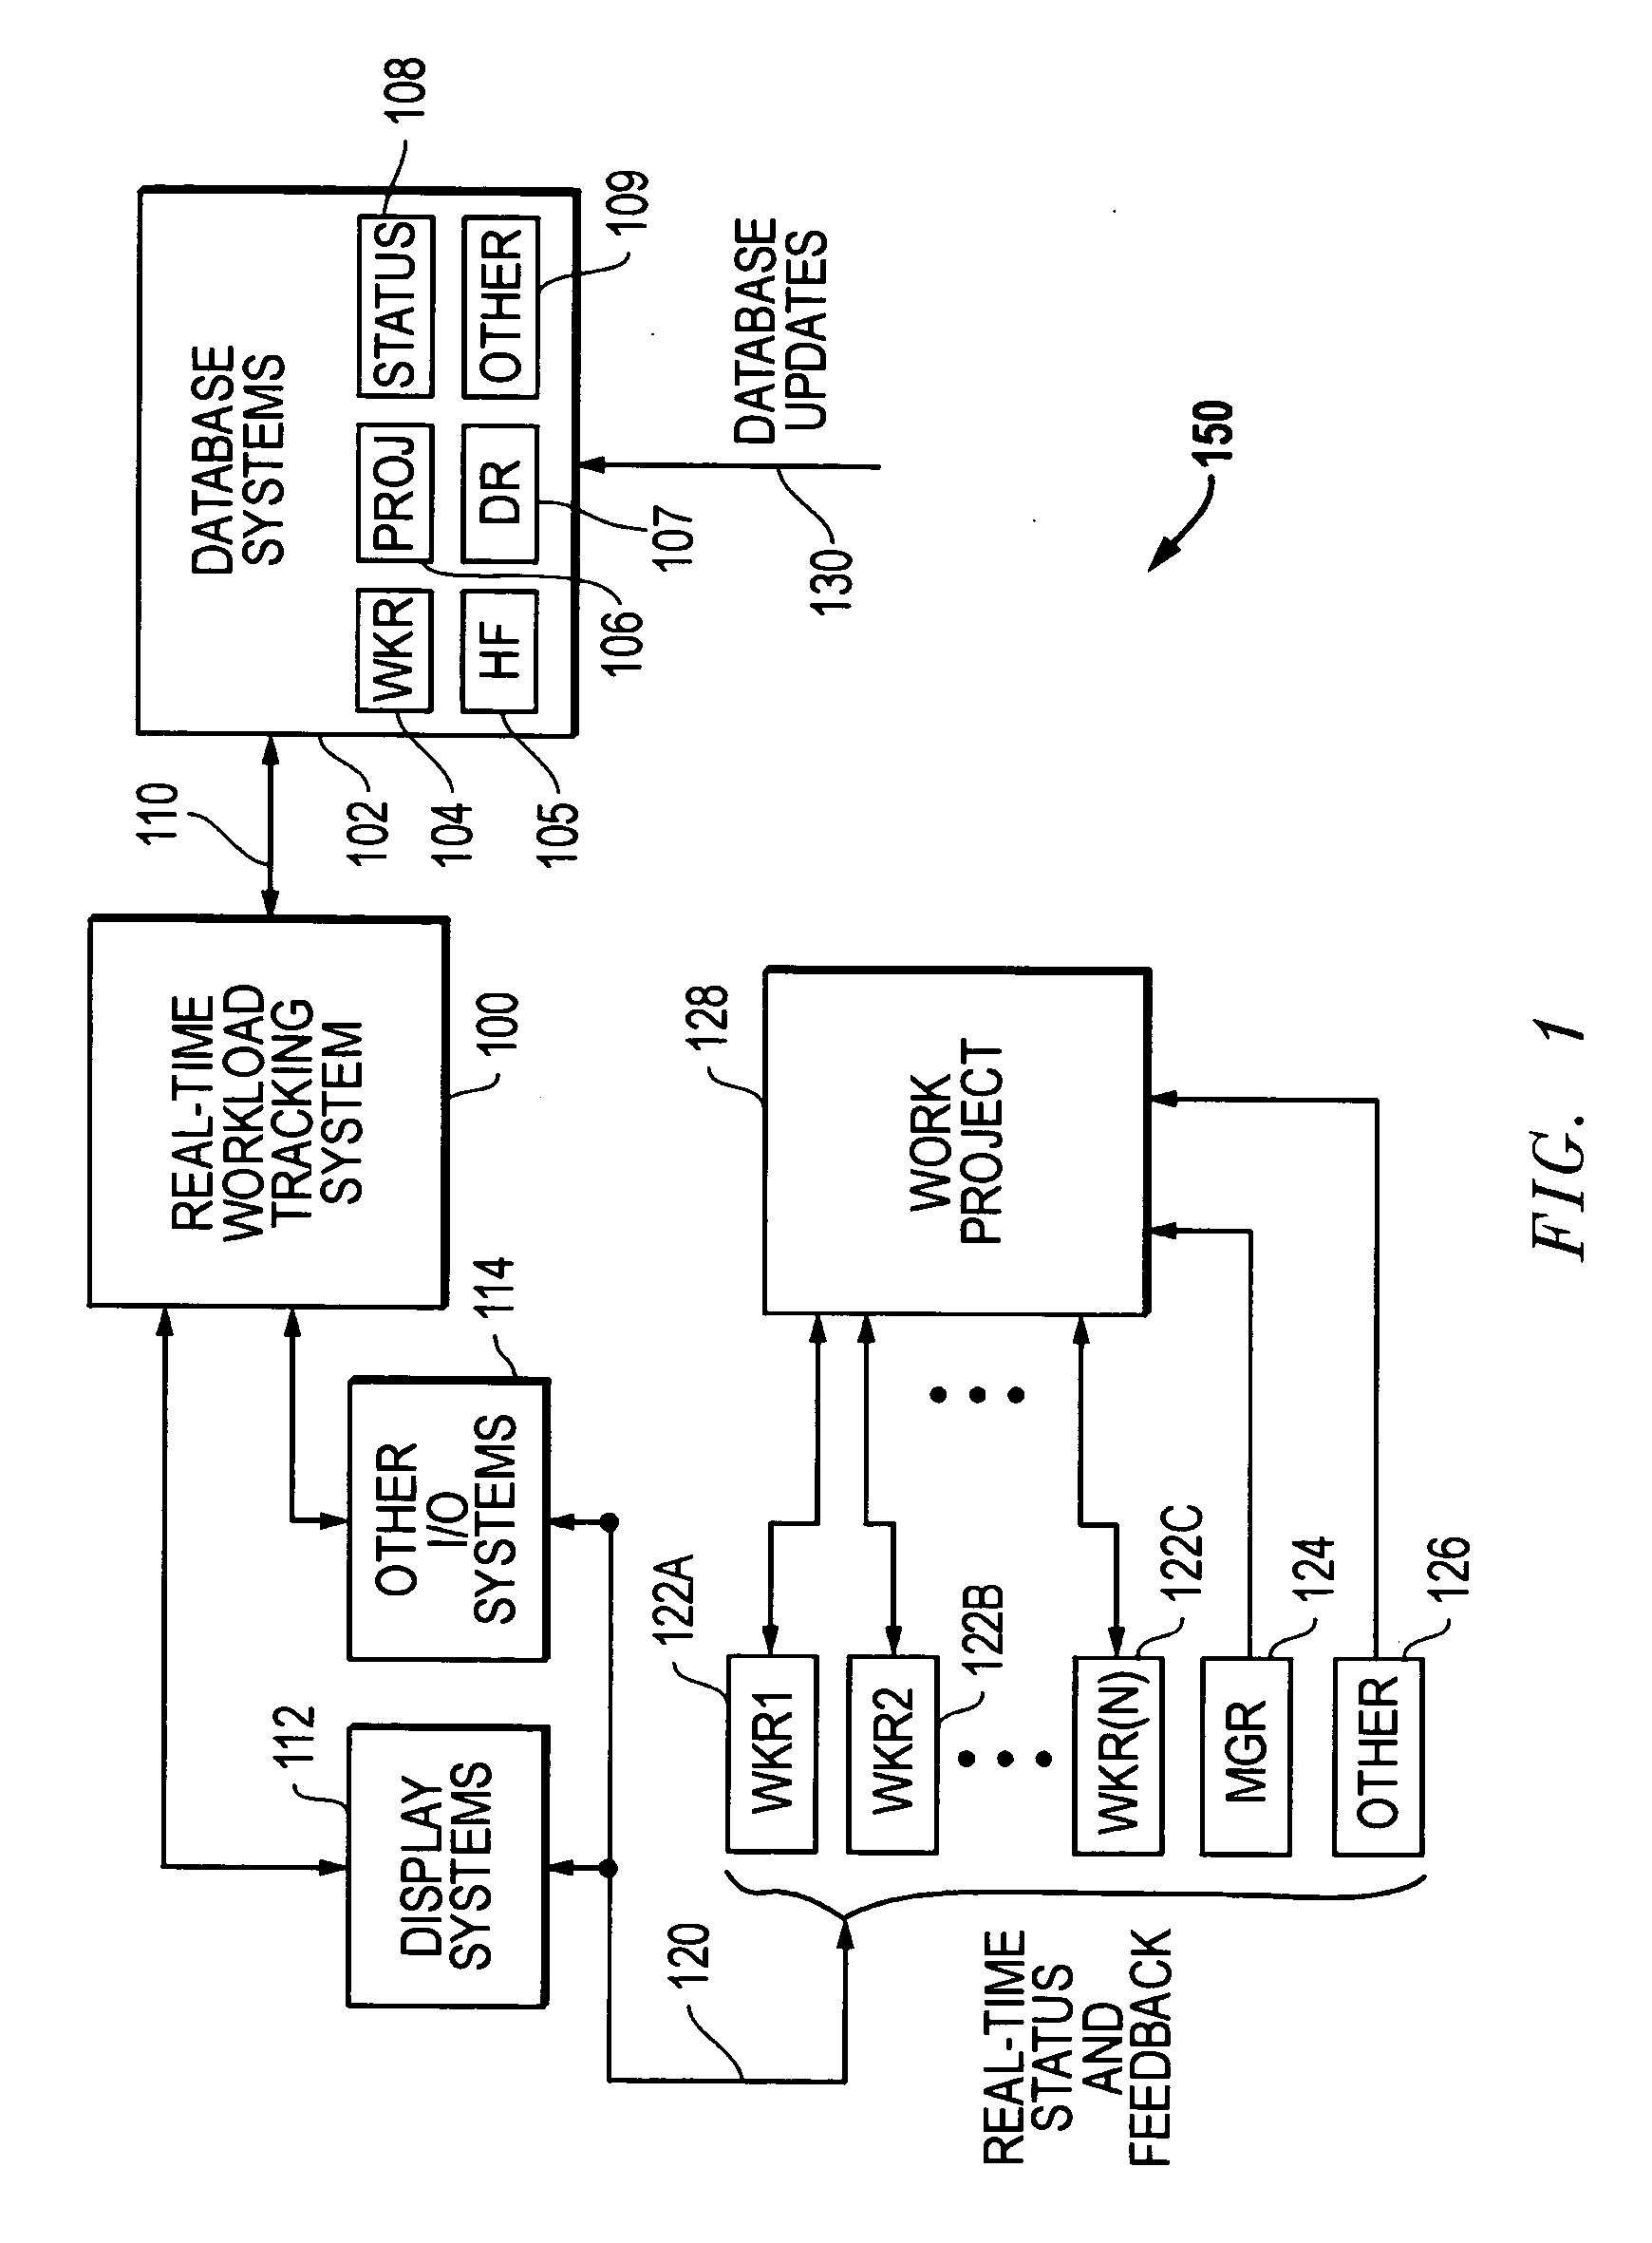 Real-time workload information scheduling and tracking system and related methods